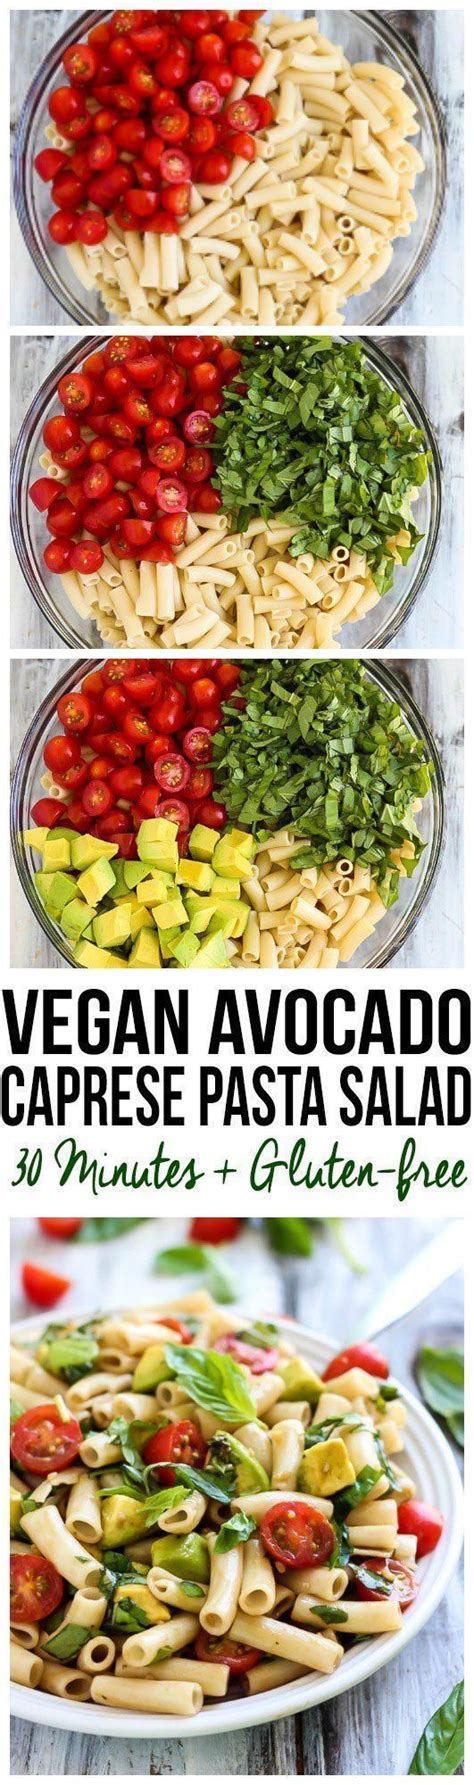 Instructions to prepare in pasta salad form, toss cooked pasta, halved cherry tomatoes, basil, mozzarella and enough olive oil to lightly coat pasta in a large mixing bowl. Vegan Avocado Caprese Pasta Salad | Recipe | Vegan recipes ...